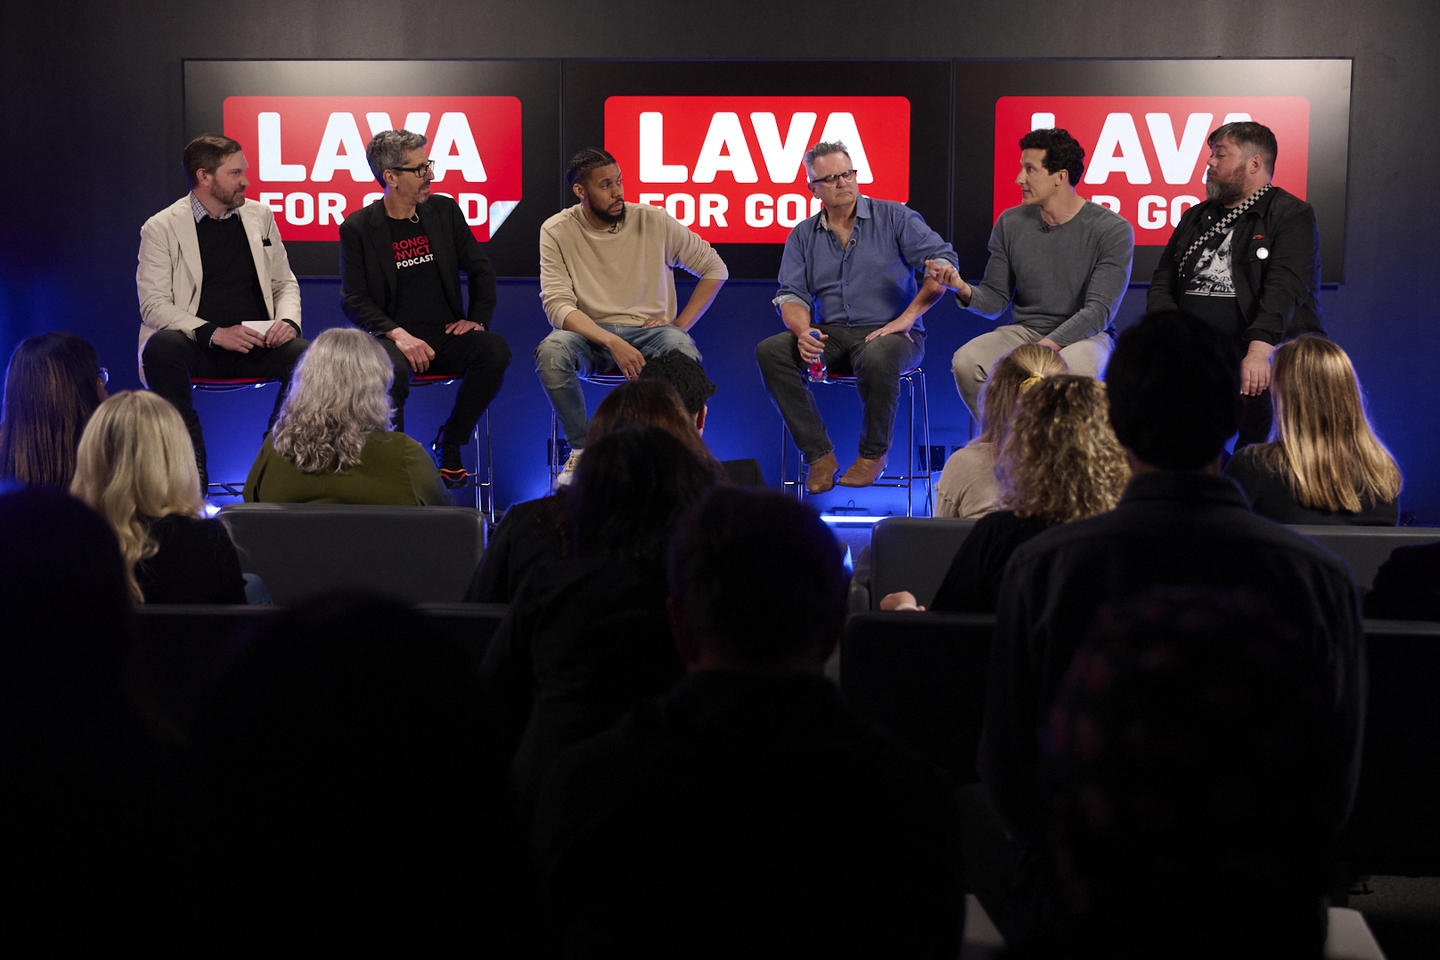 Lava for Good panel on stage